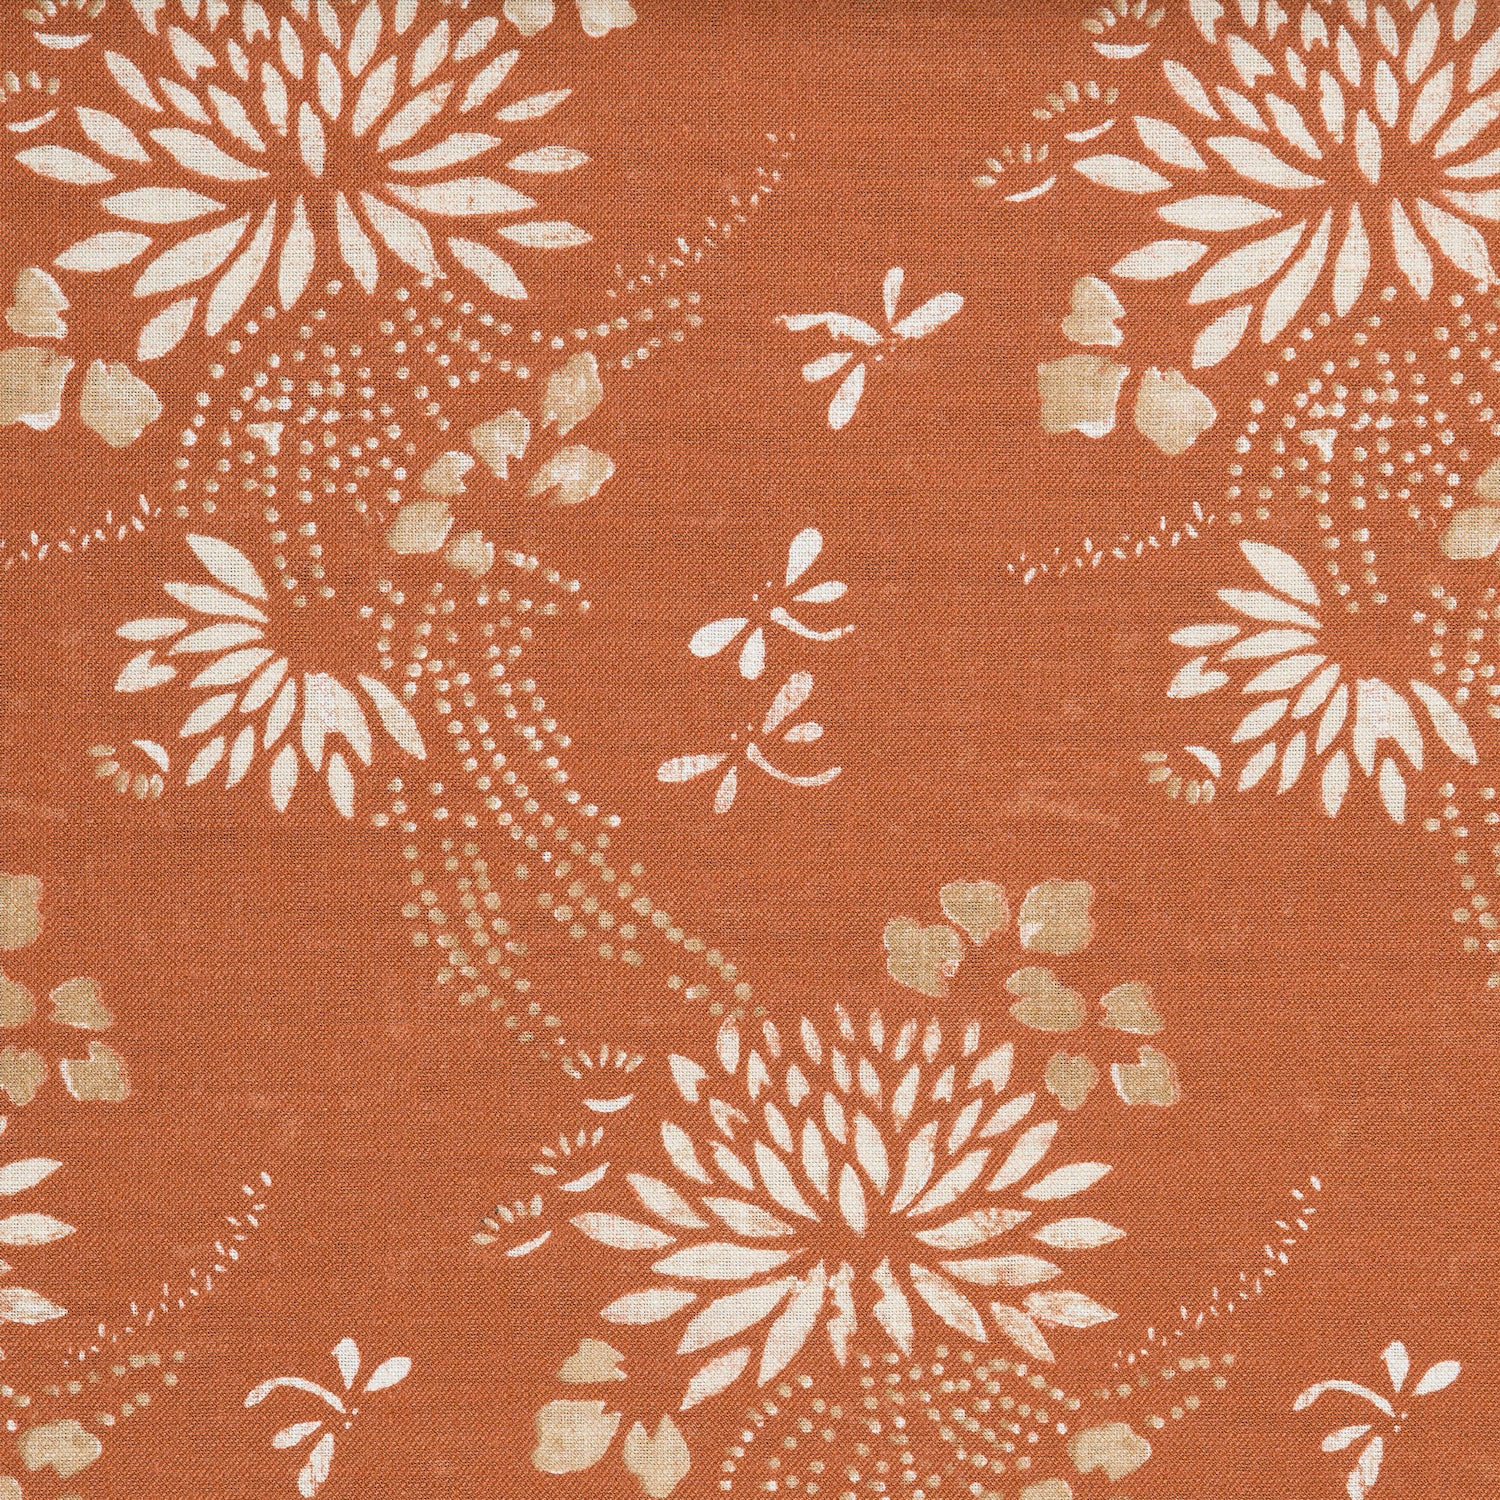 Detail of a linen fabric in a floral and dot pattern in white and gold on a rust field.